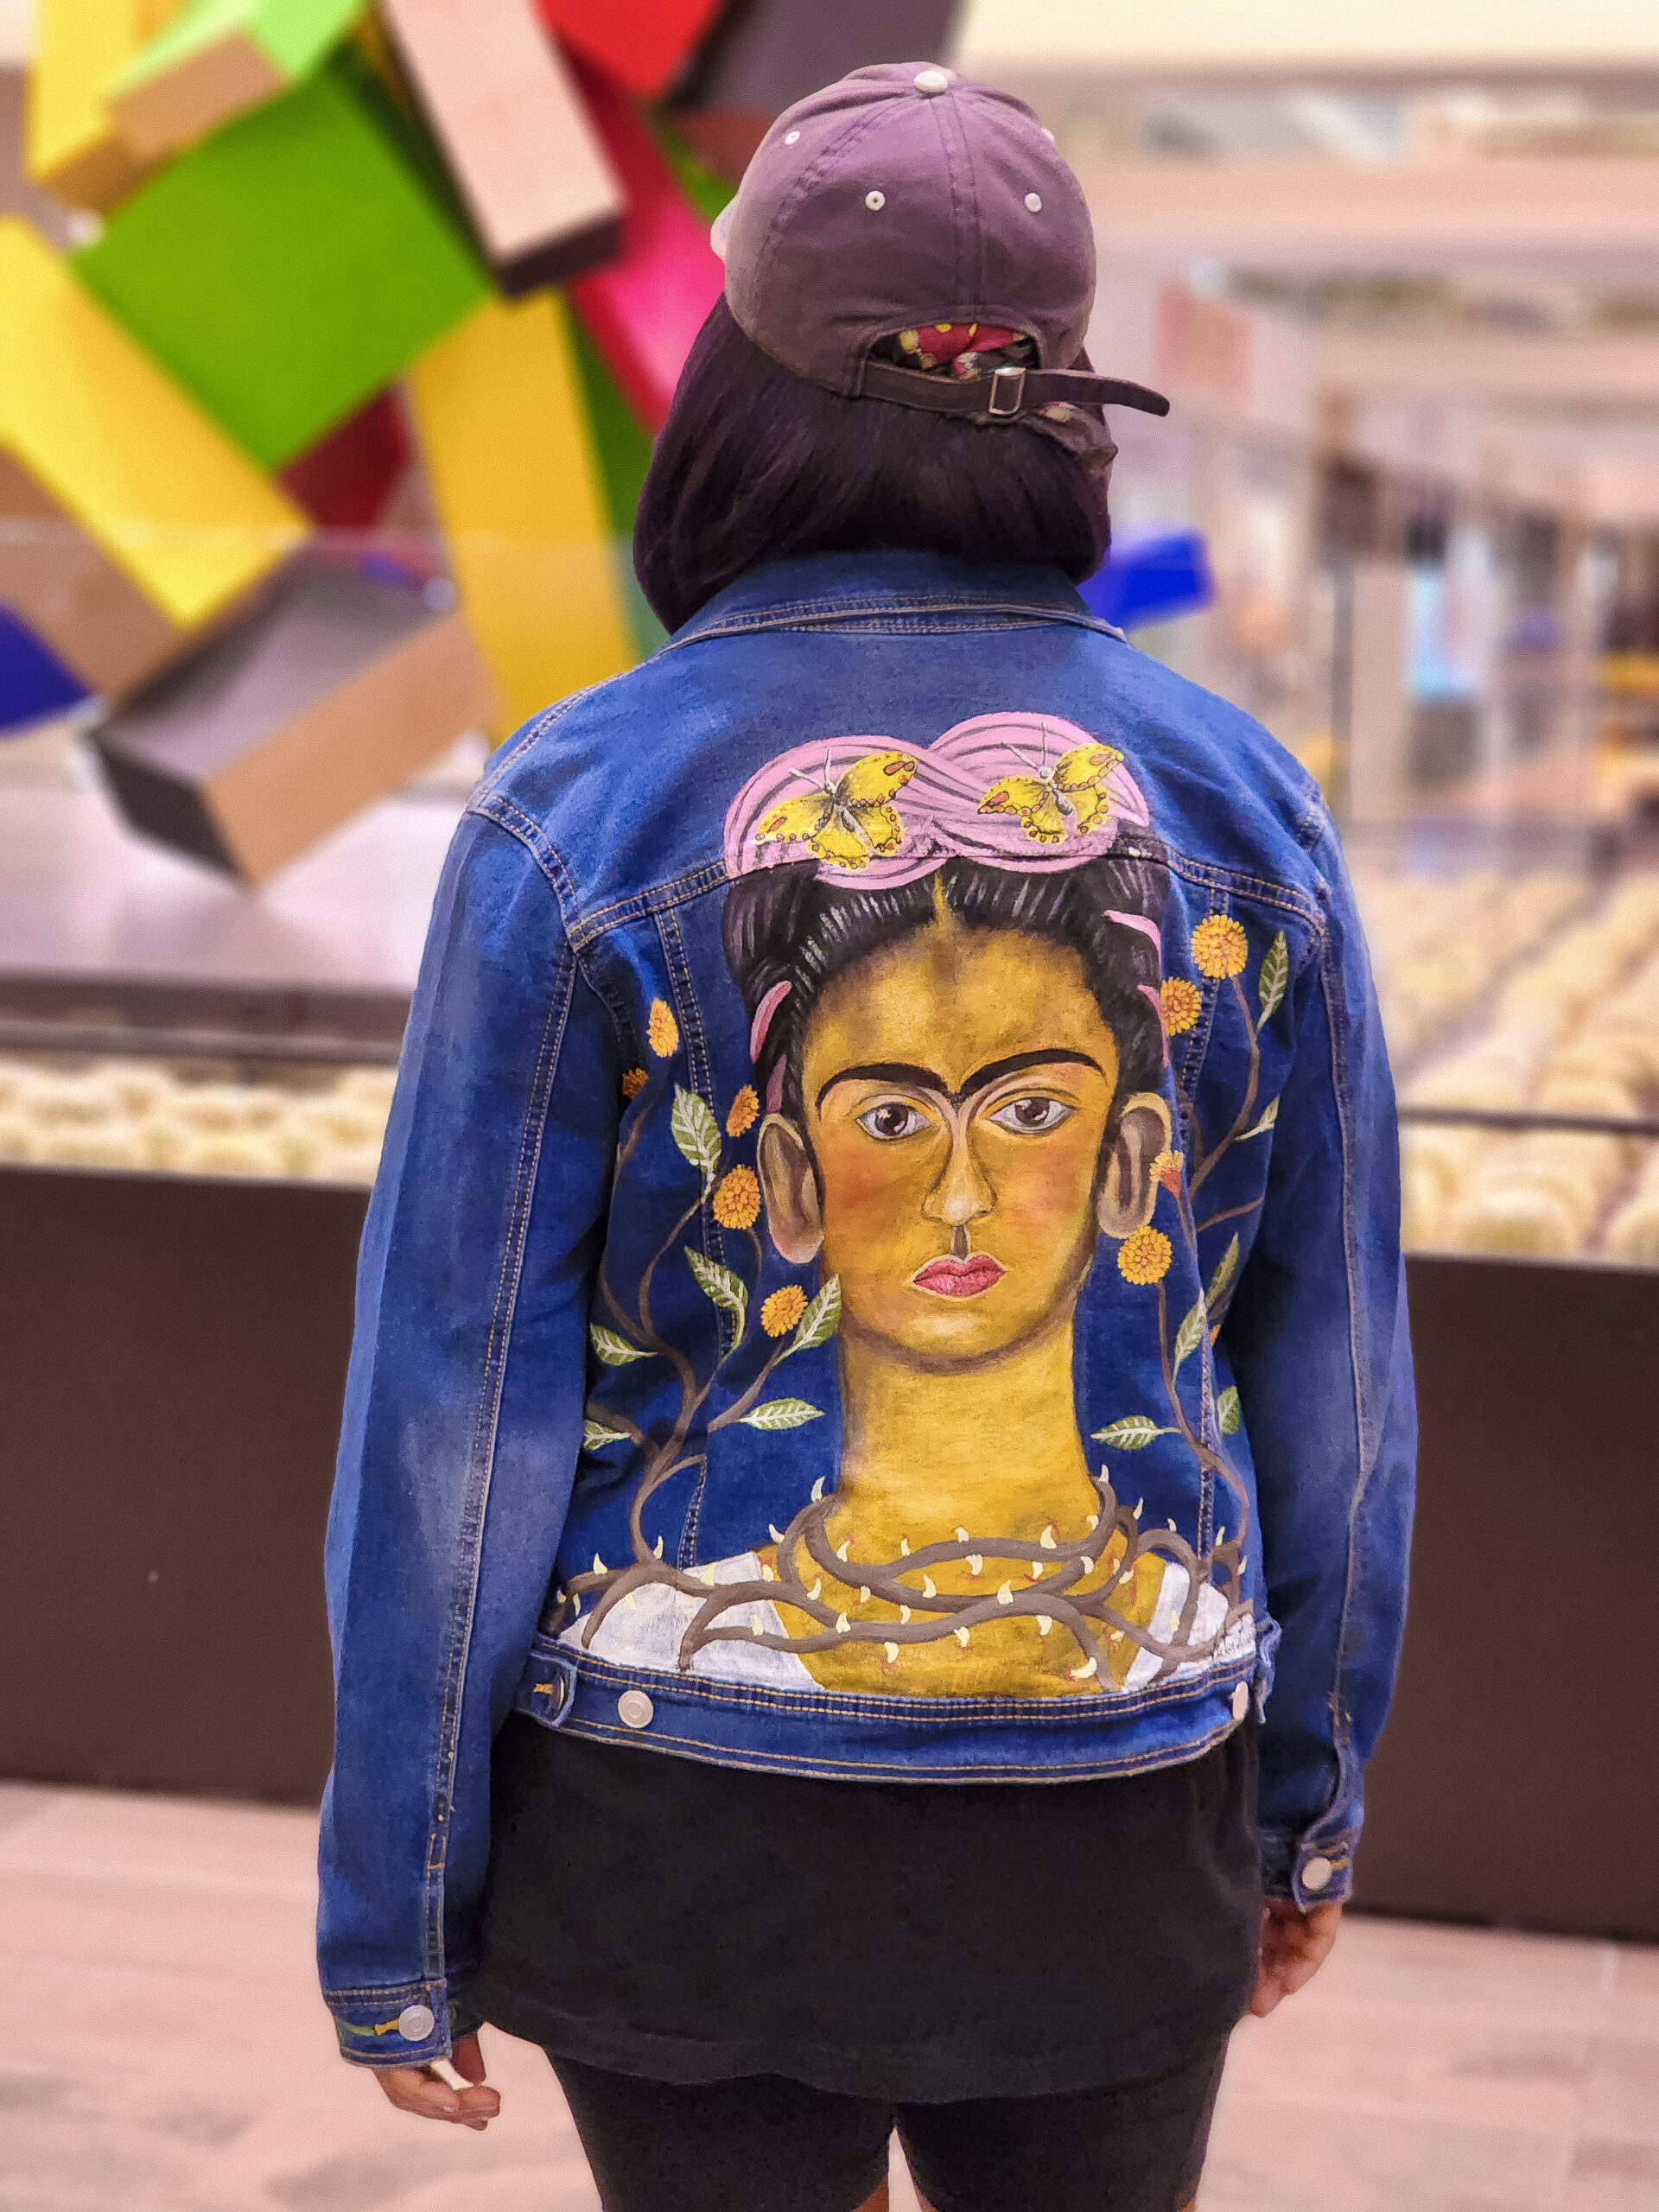 This garment is a one-of-a-kind hand-painted denim jacket with acrylic textile paint. This beautiful jacket has been heat-pressed so the jacket is machine washable.